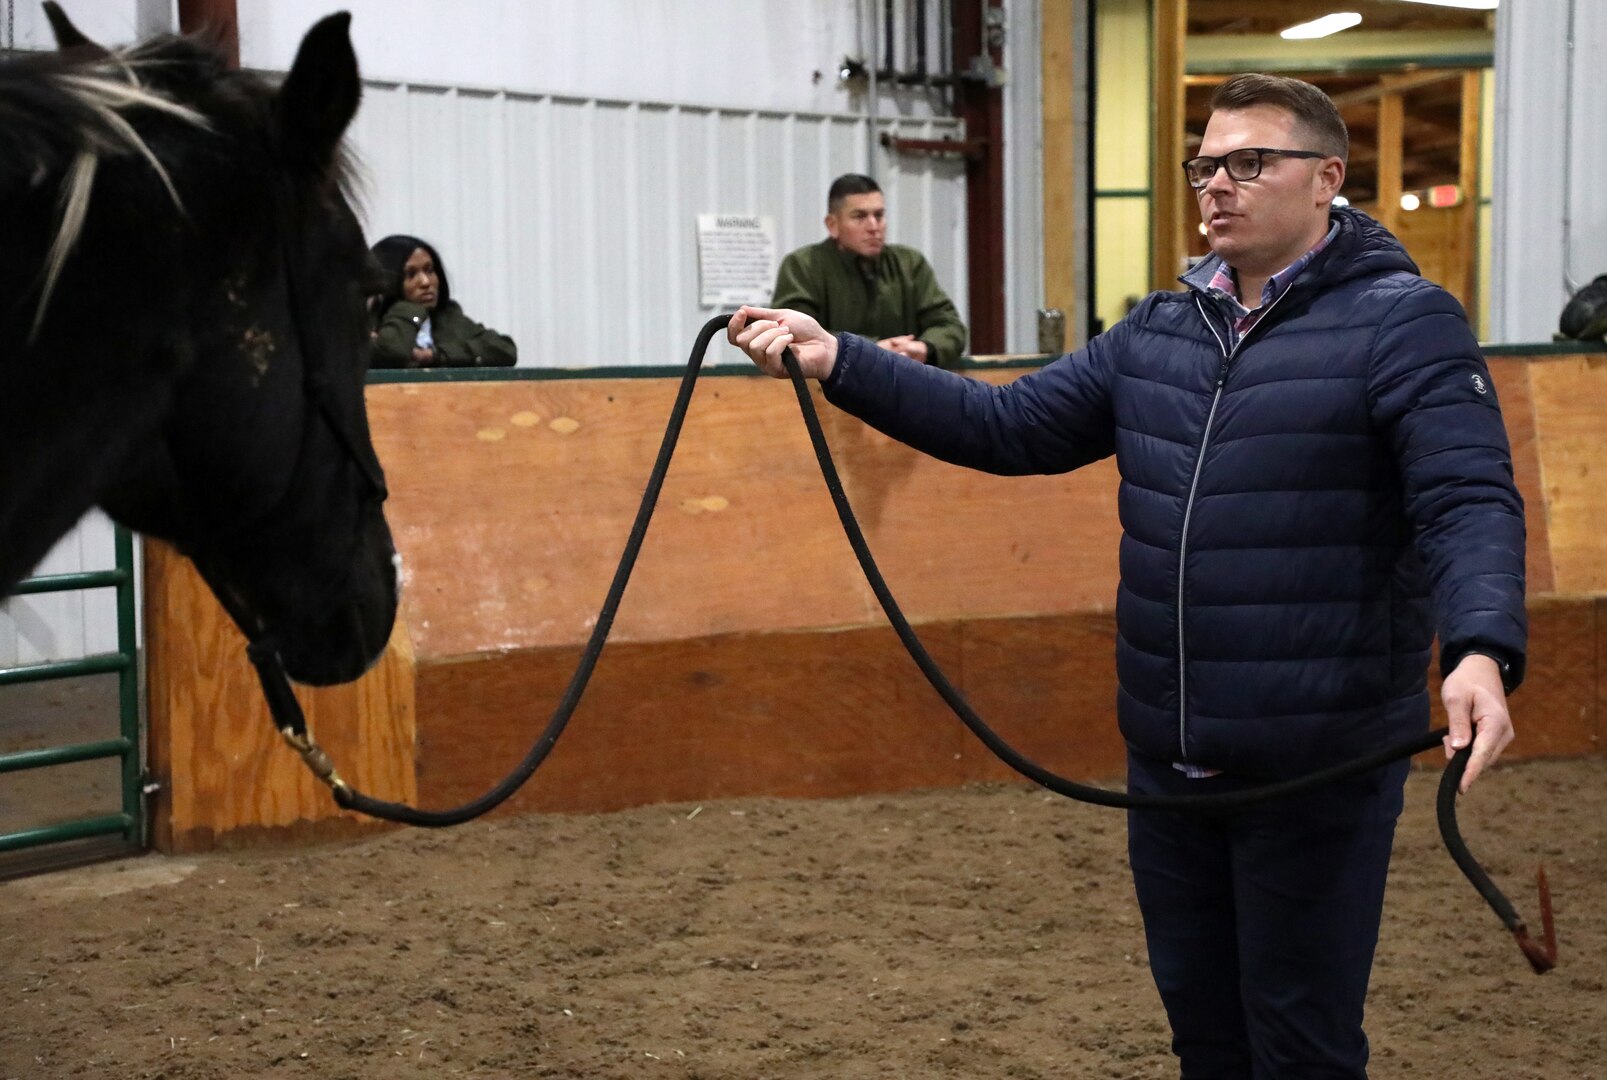 Maj. Jacob Lee, 198th Military Police Battalion executive officer, leads a therapy horse around during the Executive Leaders Performance Course at the Kentucky Horse Park’s Creech Therapeutic Riding Center in Lexington, Ky., Dec. 1, 2021.